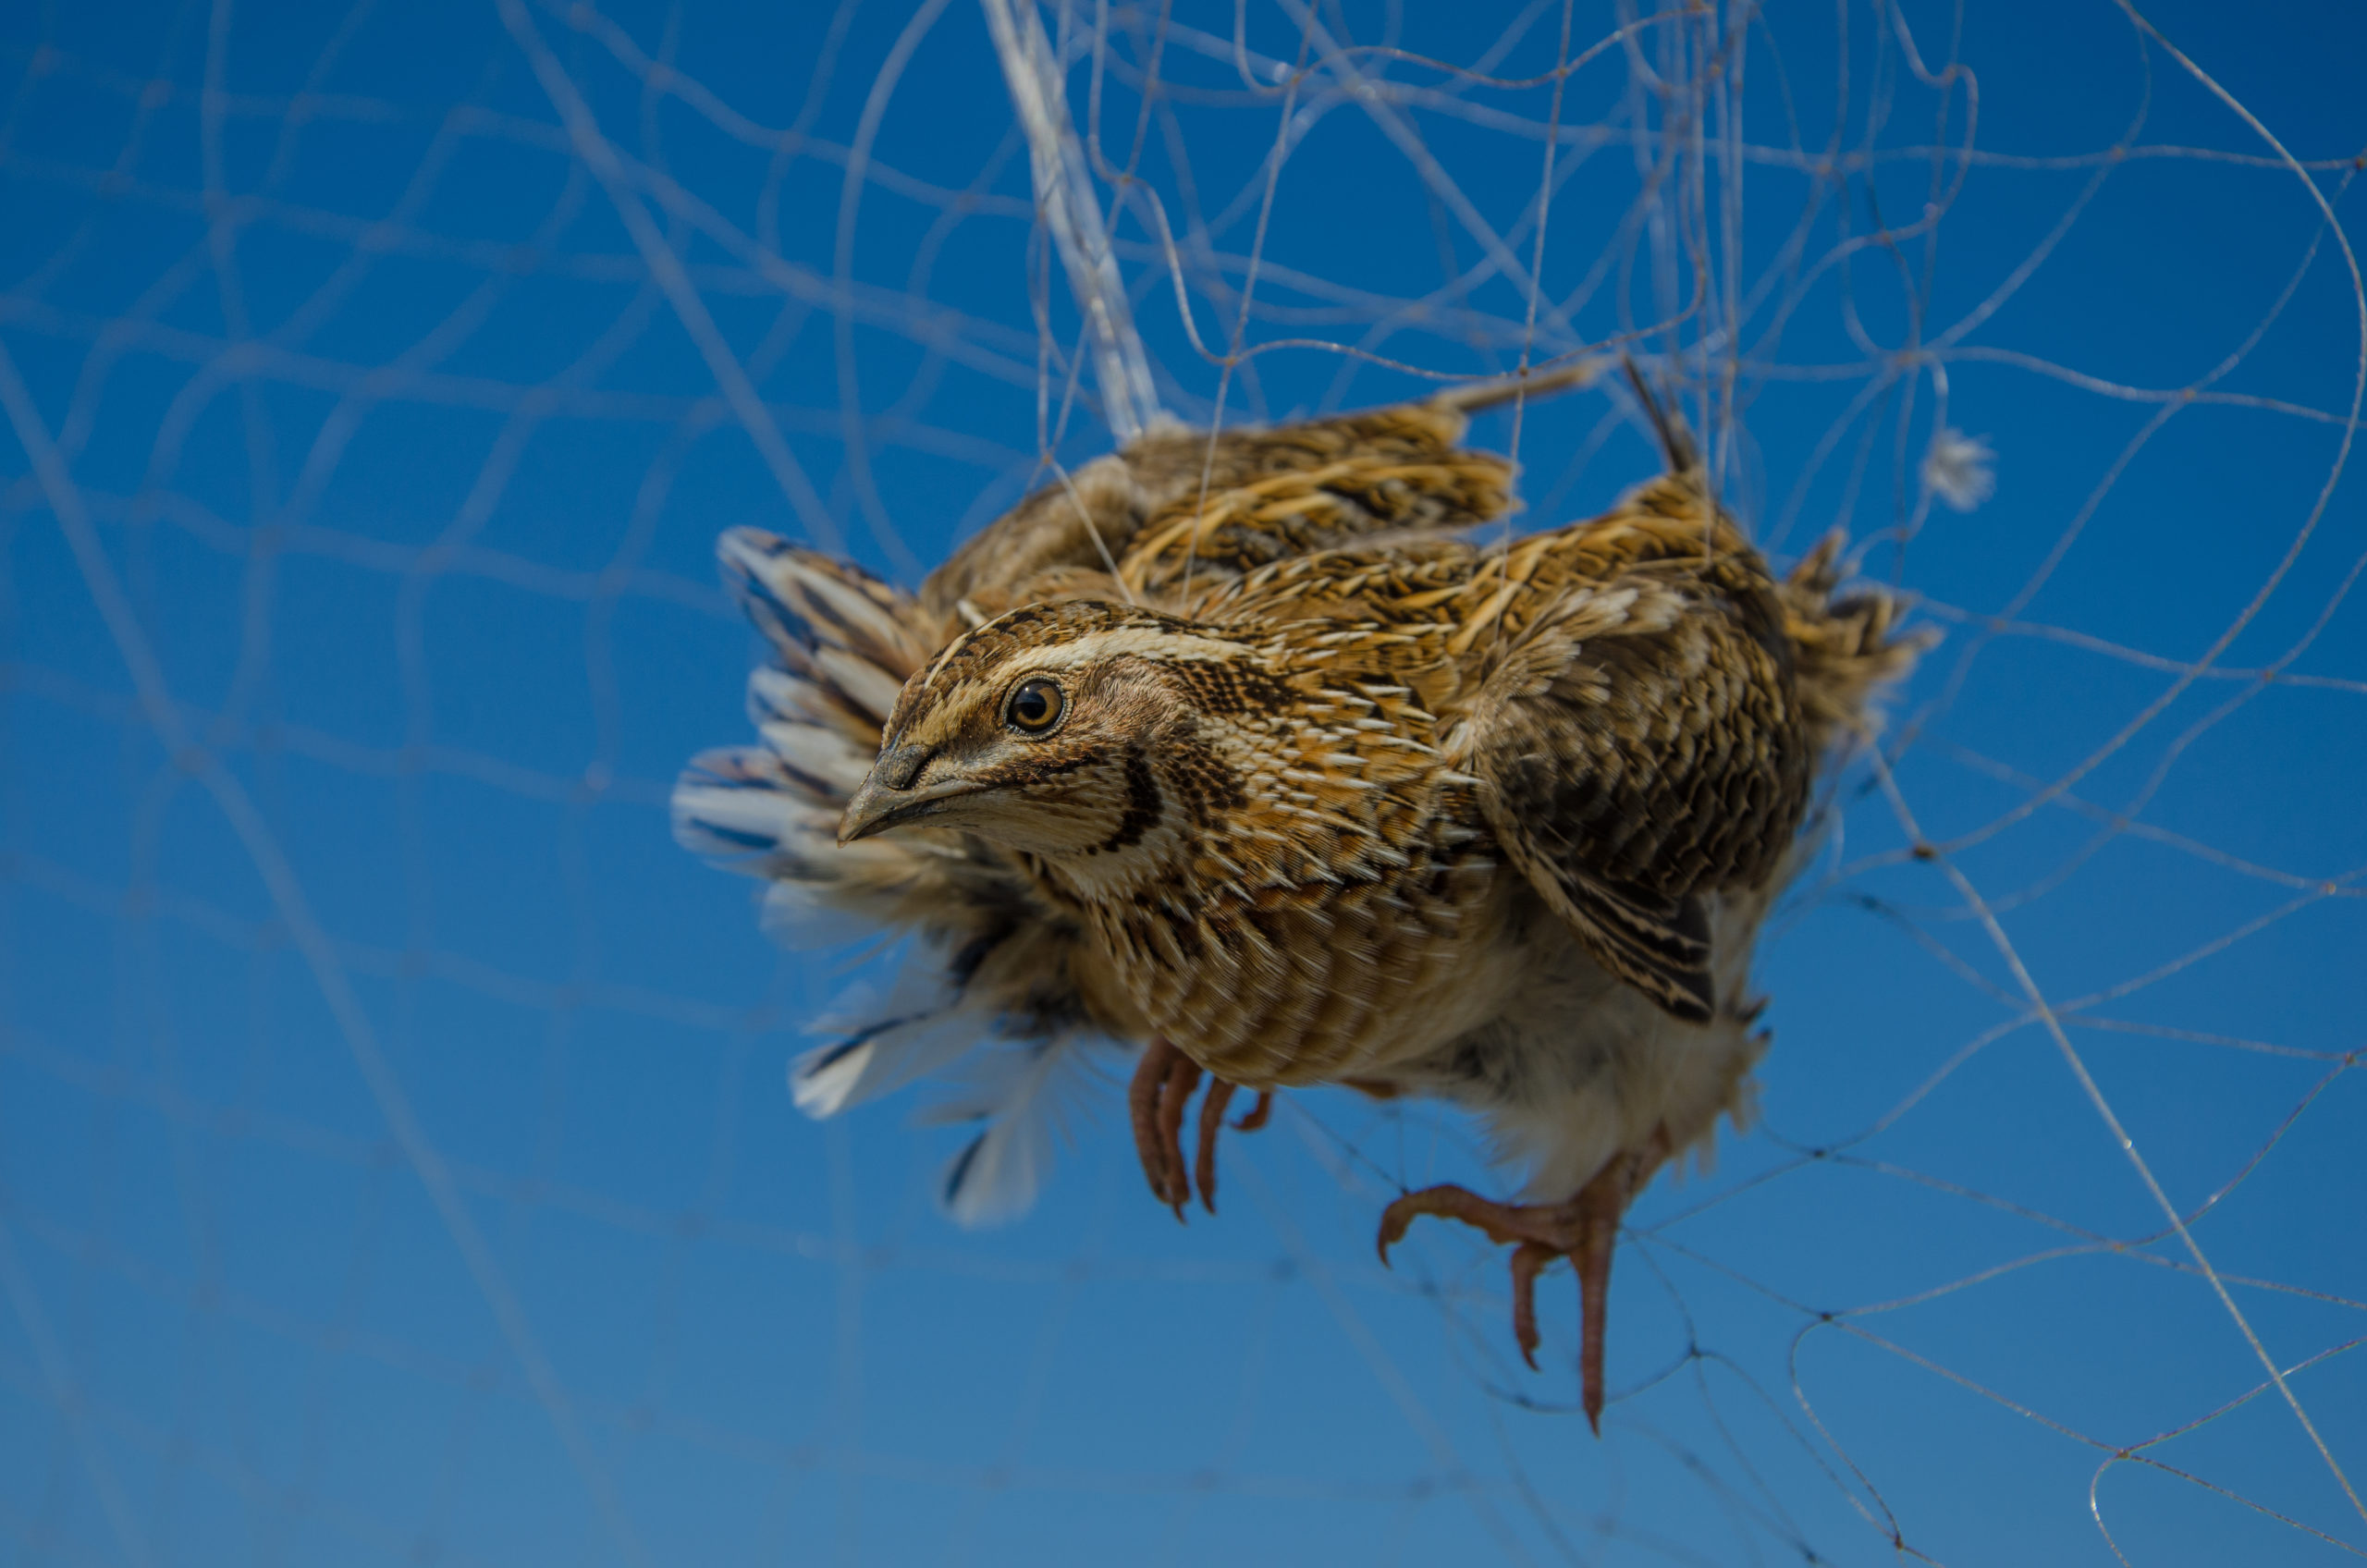 This shy bird can escape a birdwatcher's eye, but not illegal trappers' nets